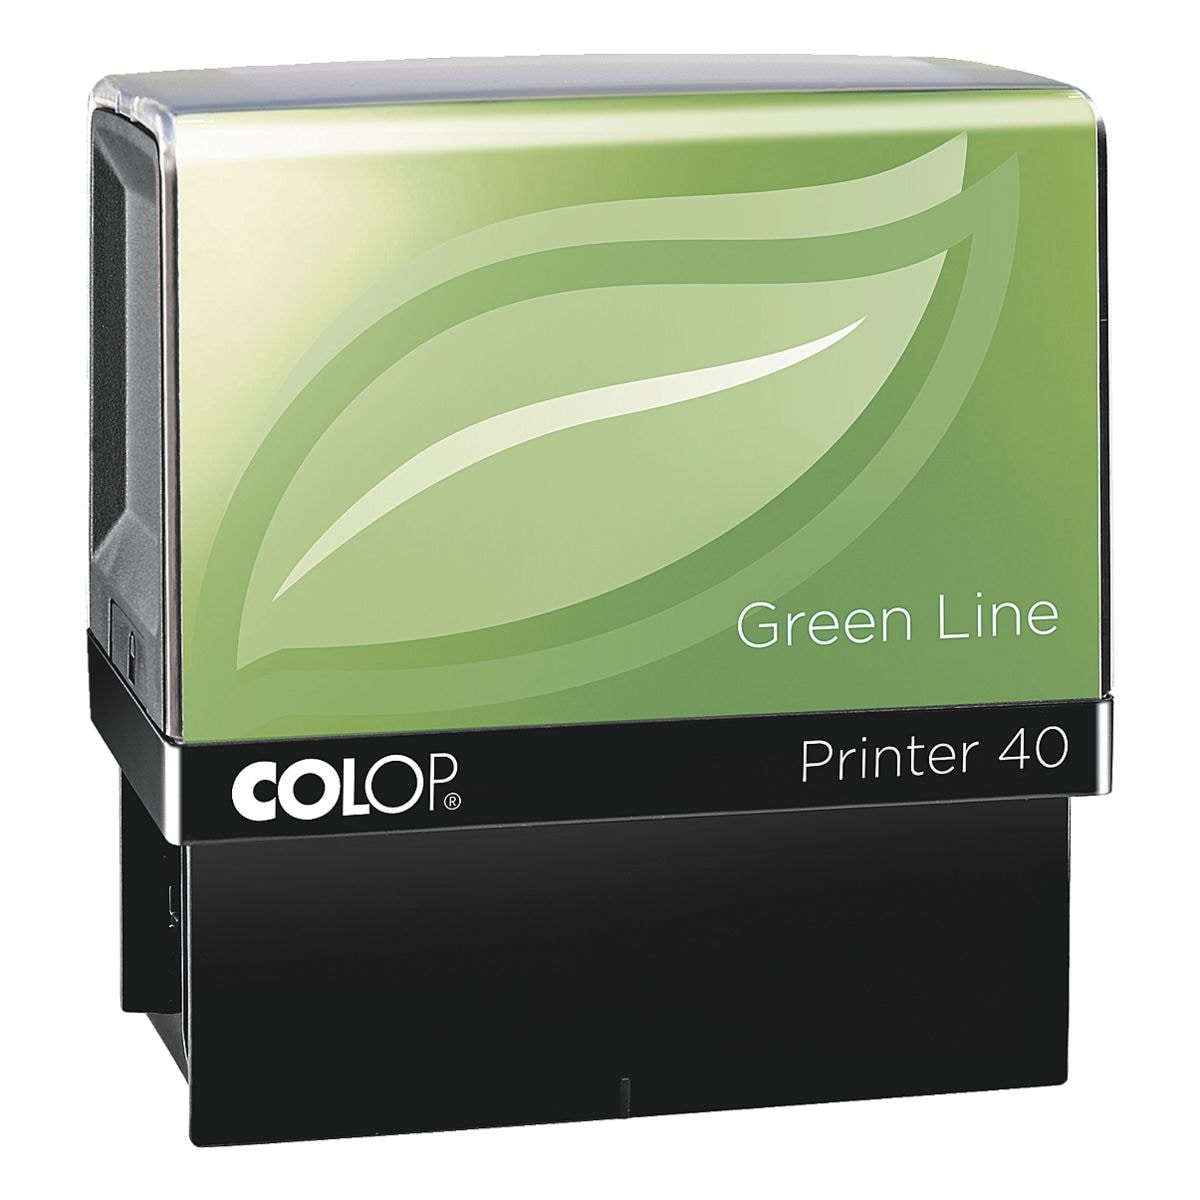 Colop Selbstfrbestempel Printer 40 Green Line